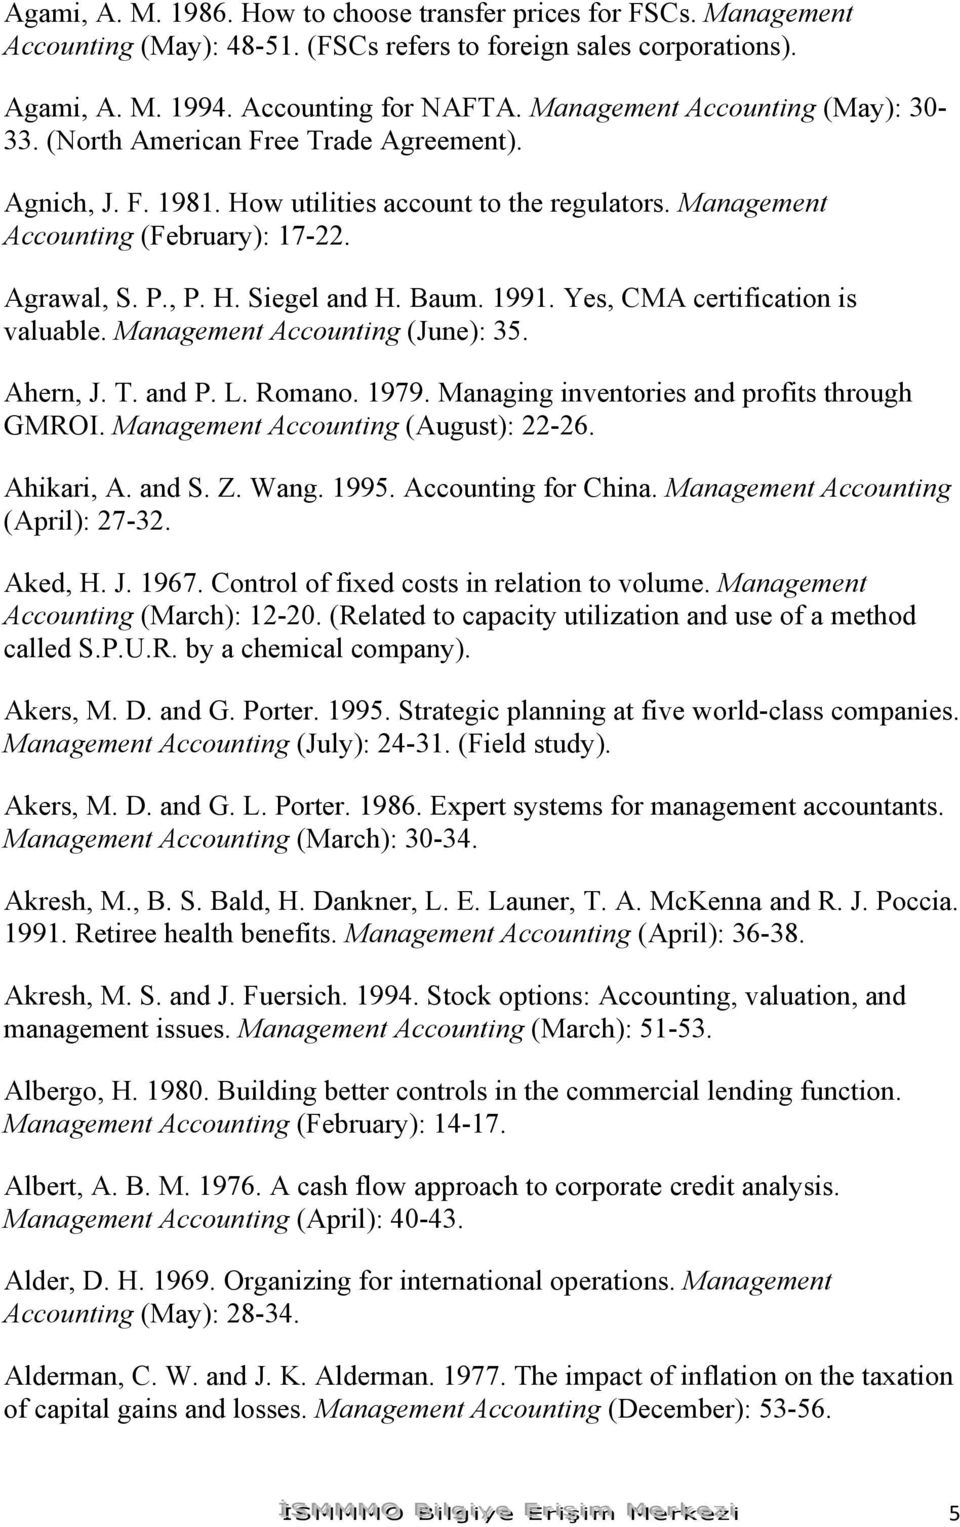 Baum. 1991. Yes, CMA certification is valuable. Management Accounting (June): 35. Ahern, J. T. and P. L. Romano. 1979. Managing inventories and profits through GMROI.